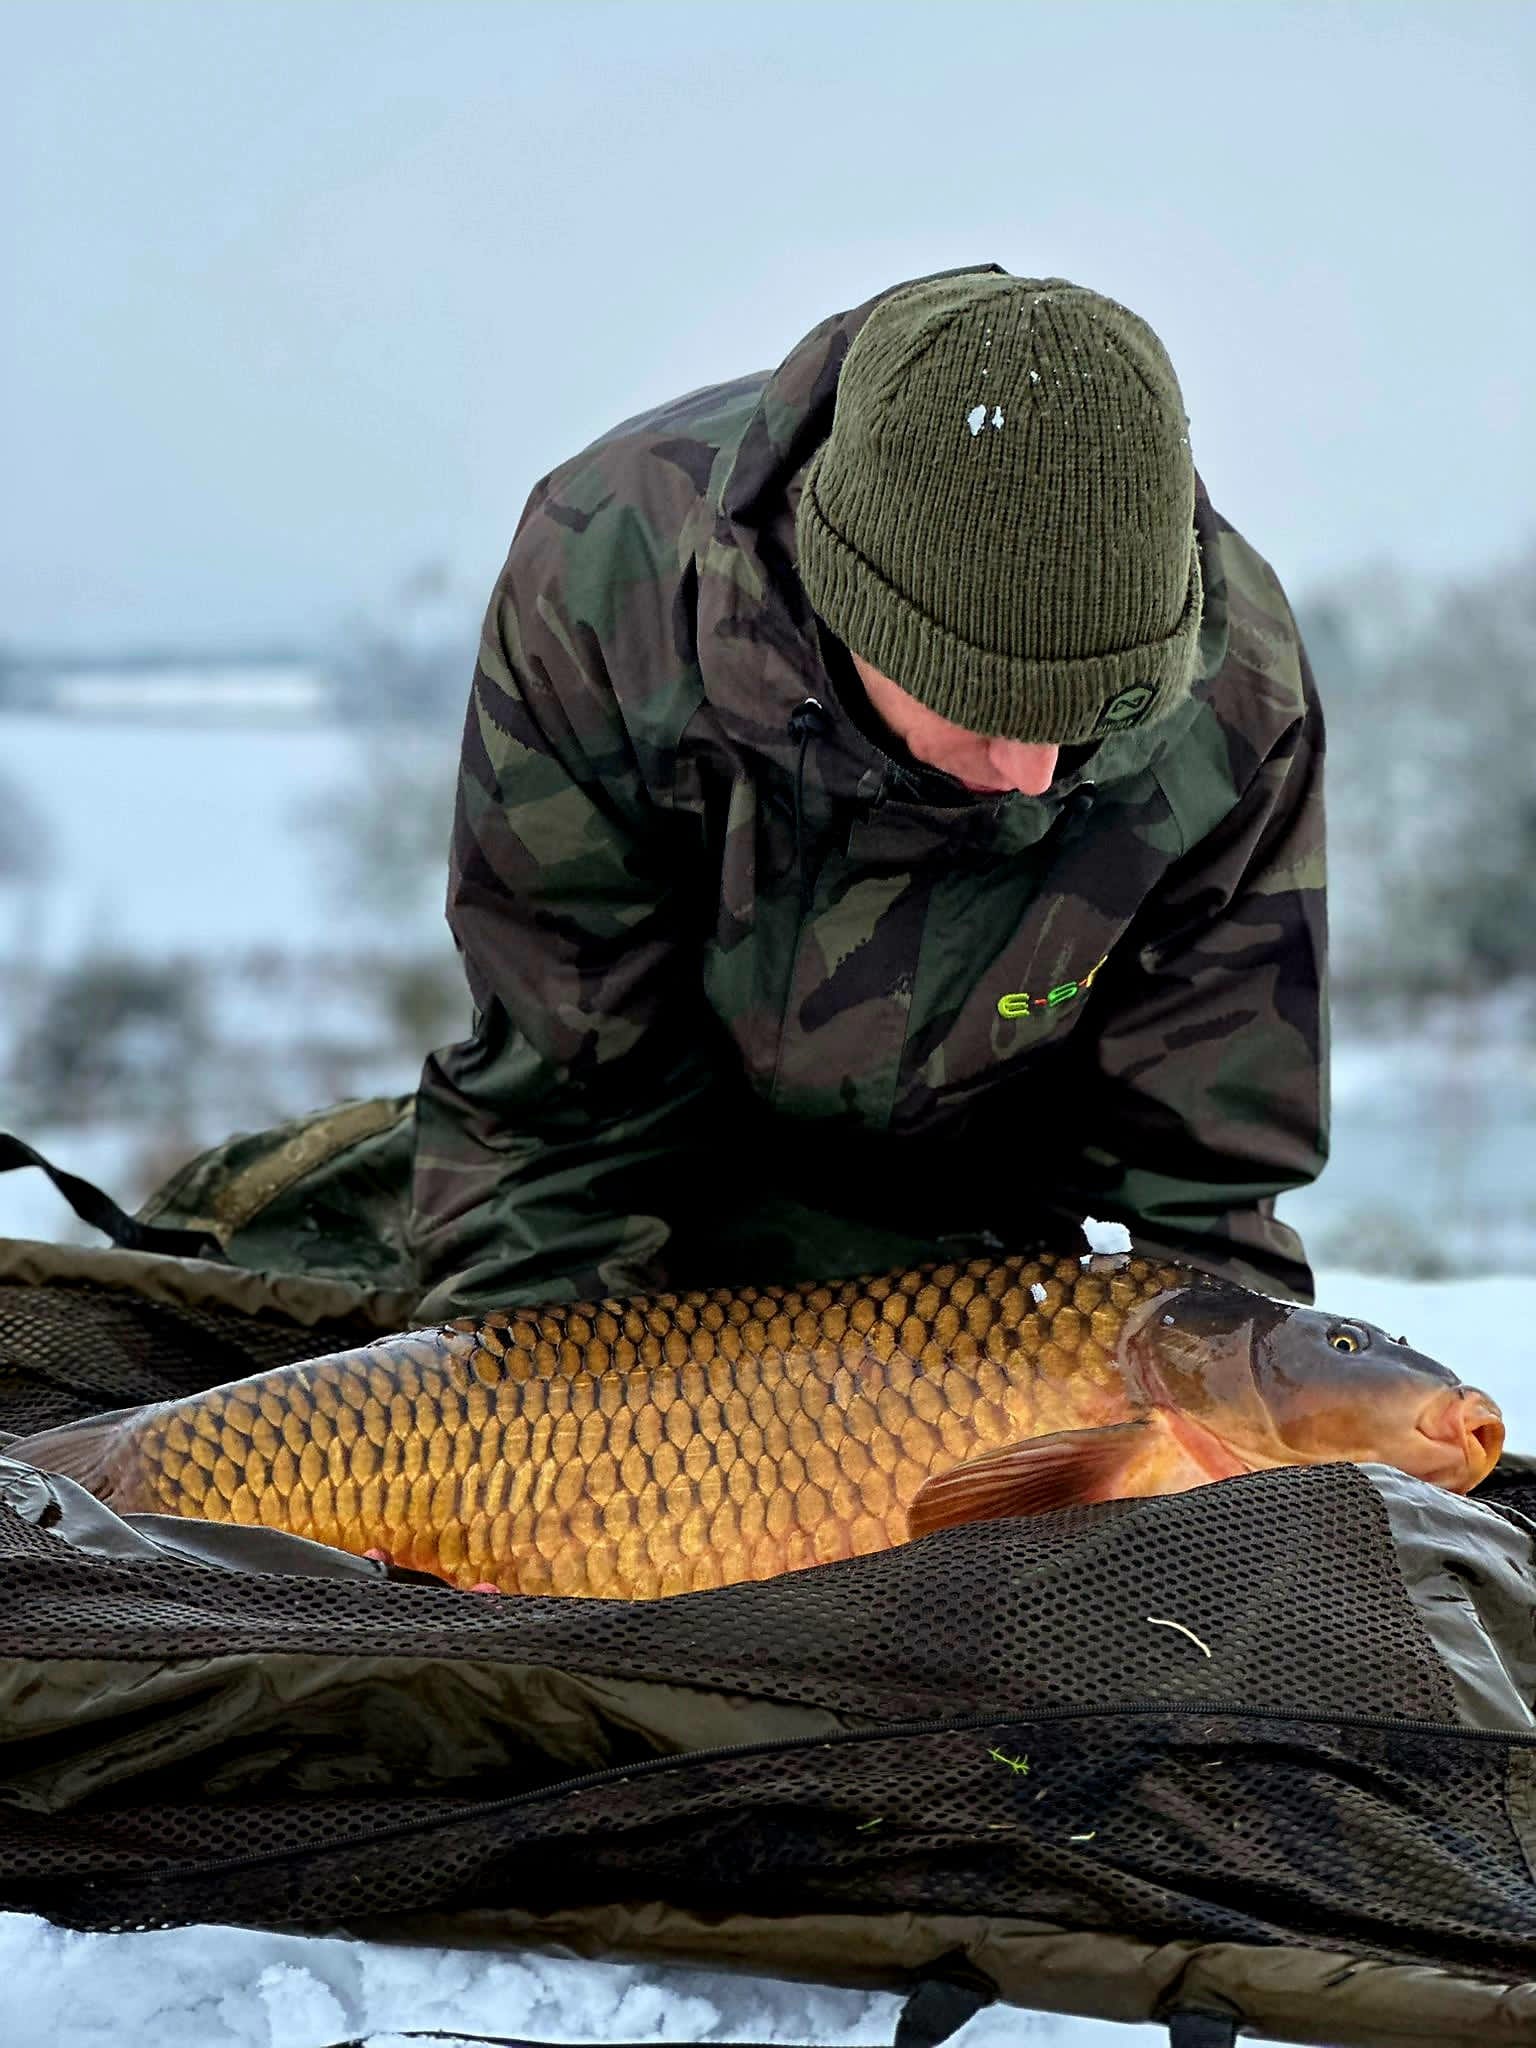 When is the best time to fish for carp?